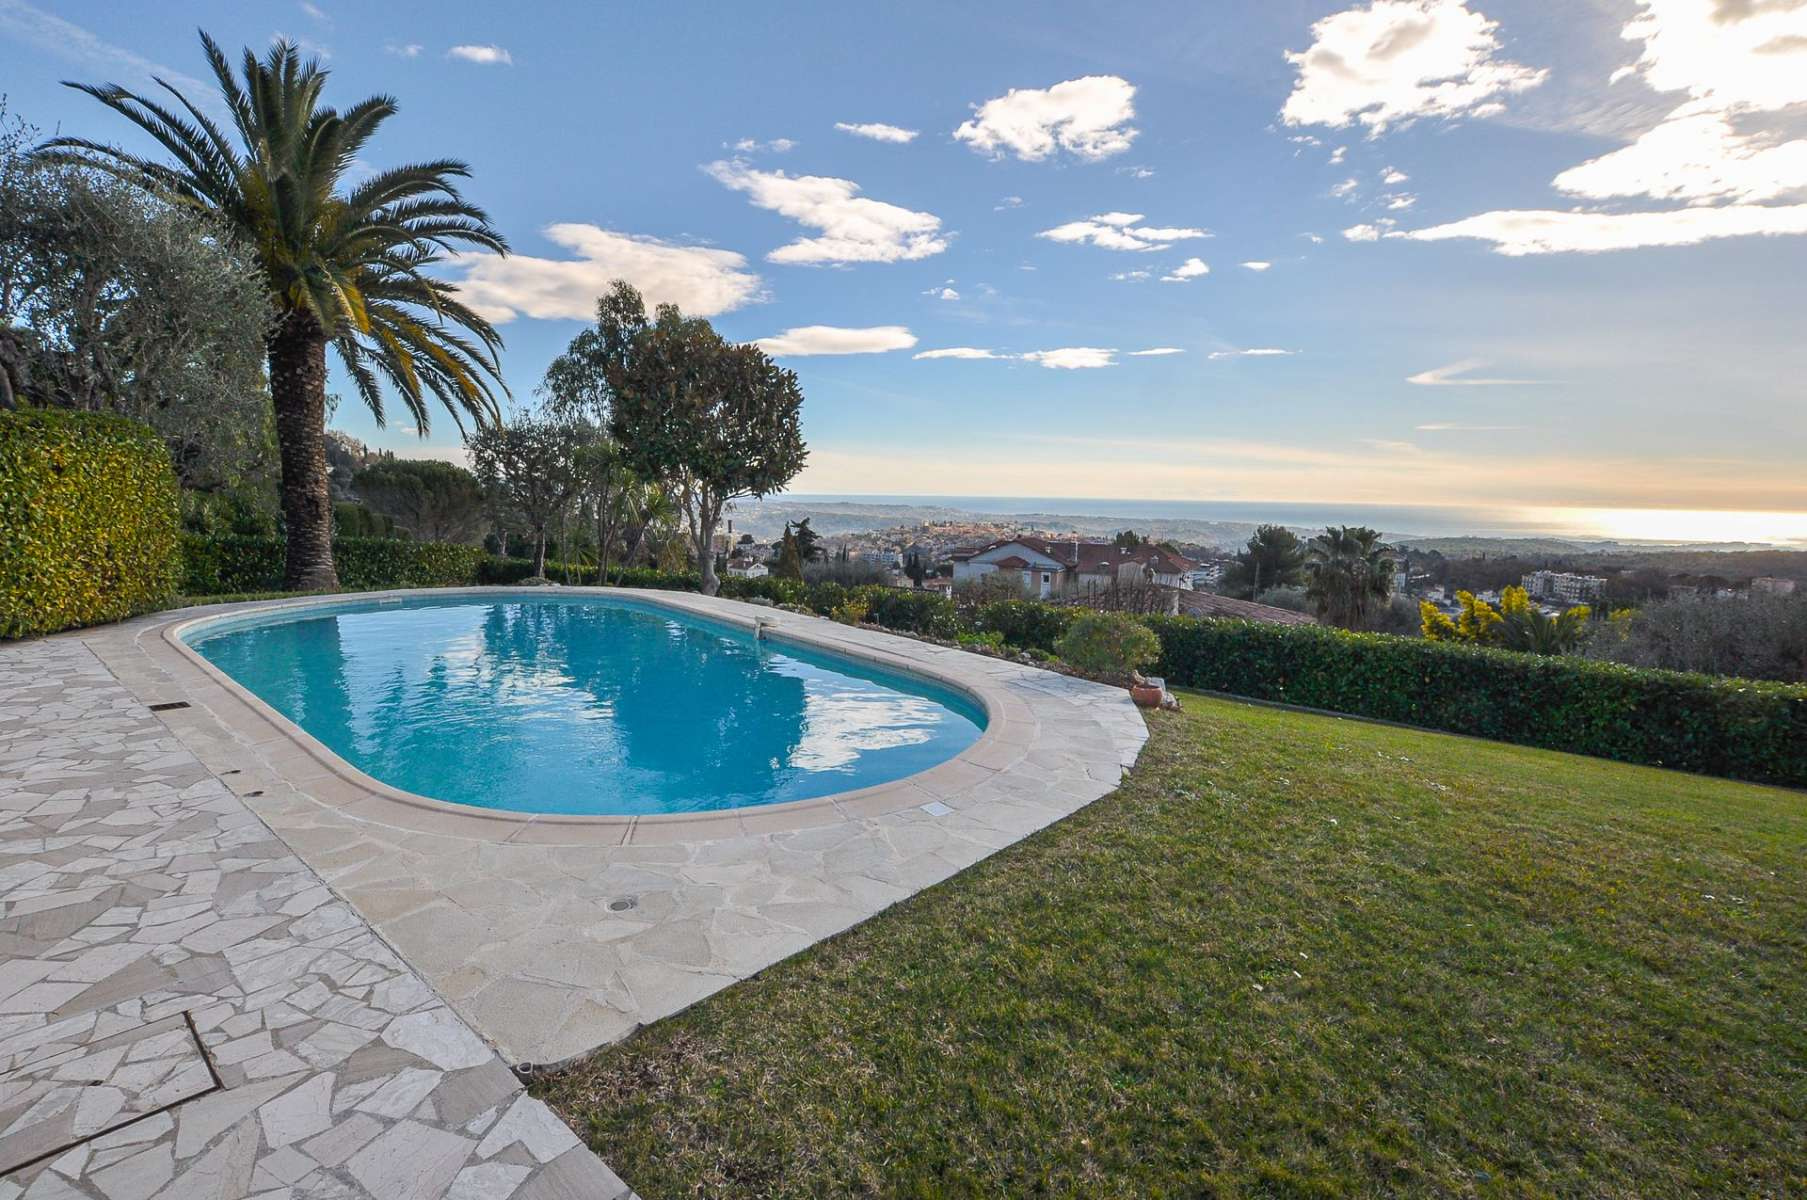 Villa in a quiet and peaceful location at Vence